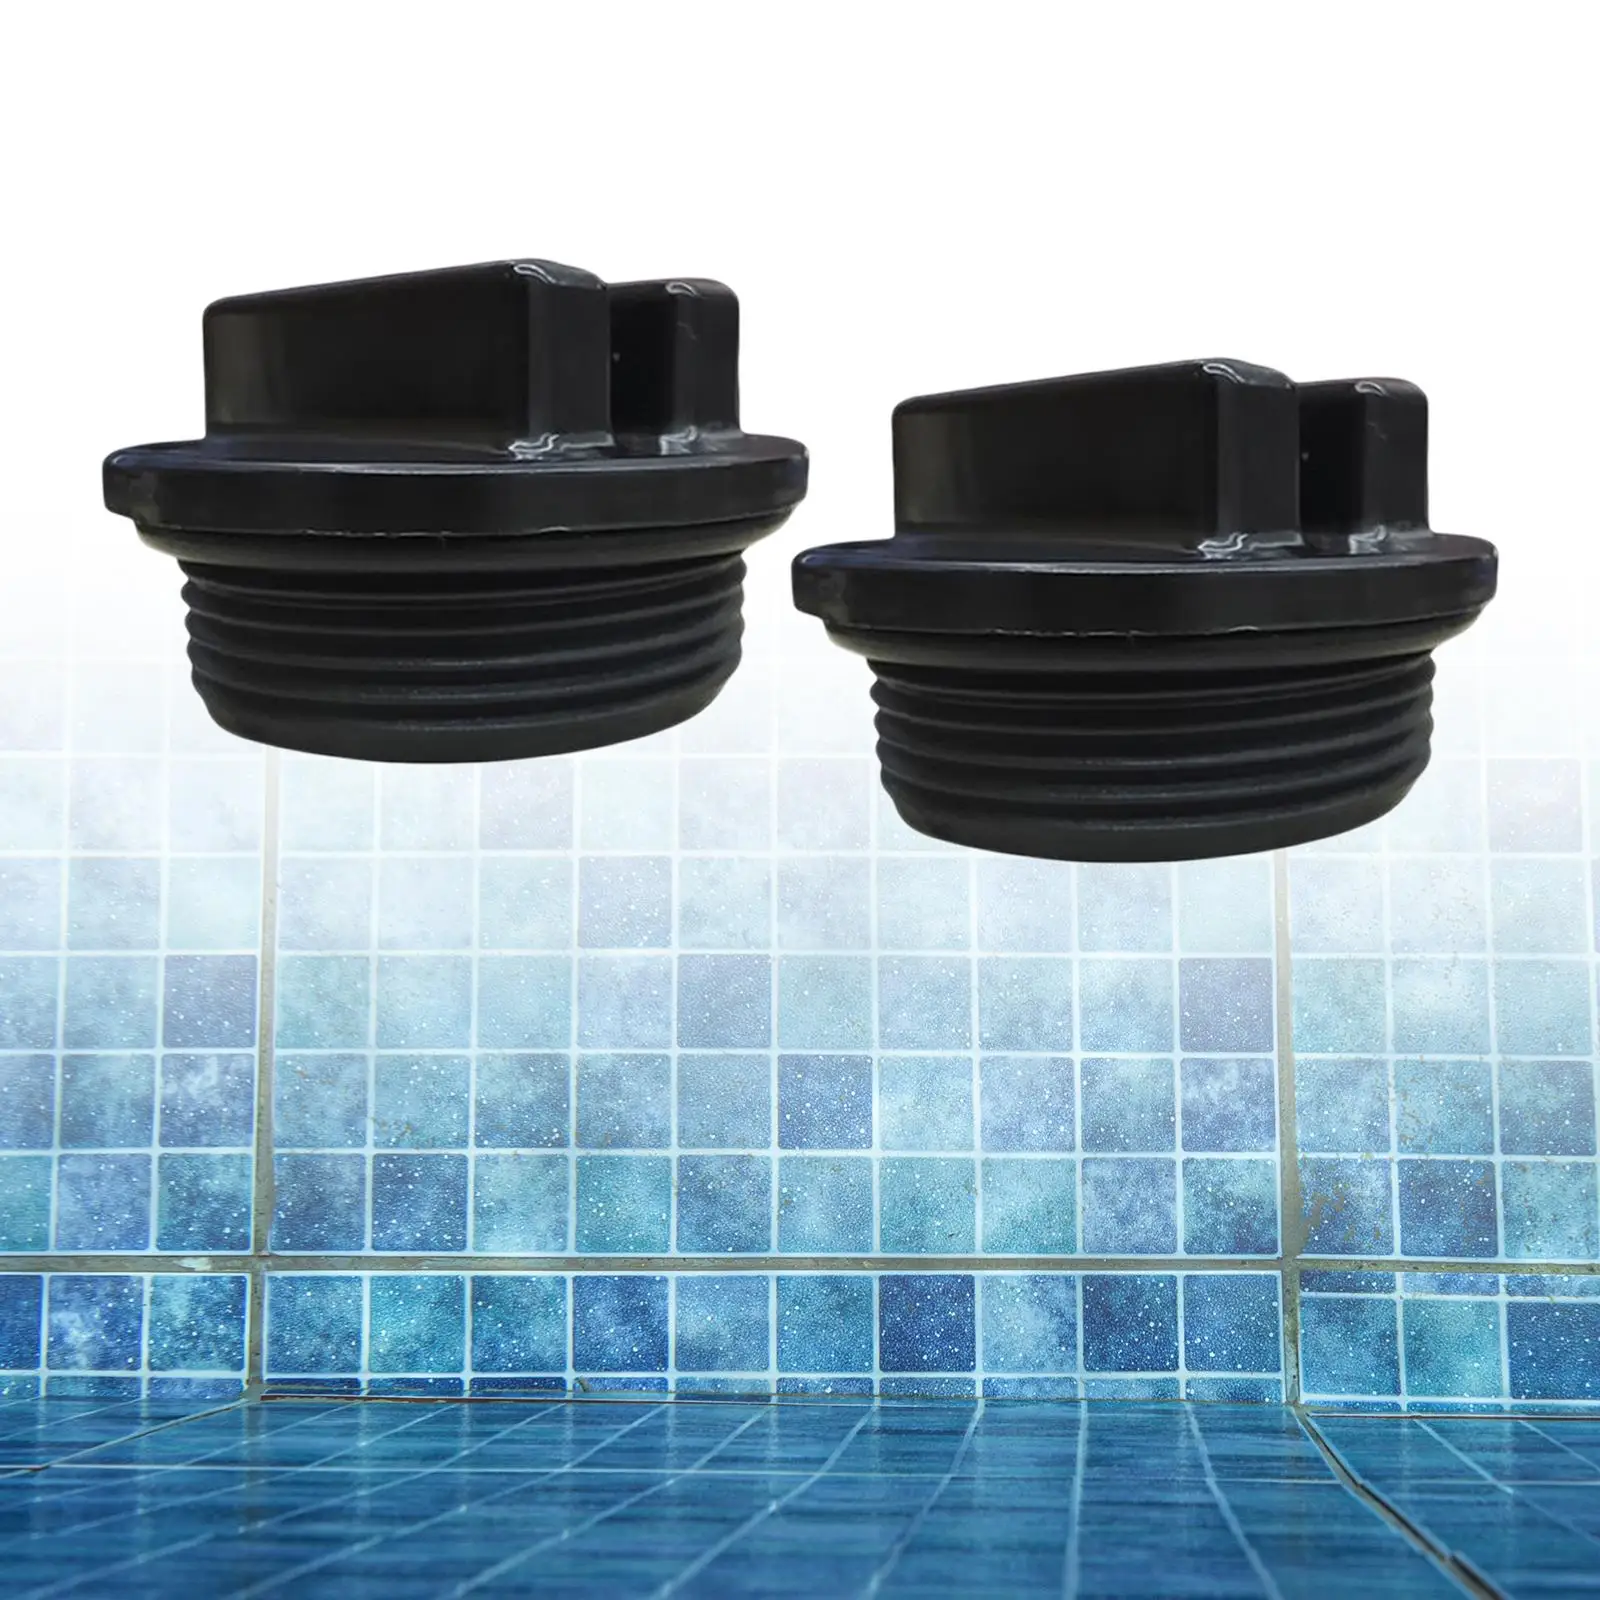 2Pcs Threaded Pool Filter Drains Replacement Parts Drain Cover Outlet Plugs 1.5 Inches Filter Drain Caps for Bathtub Accessories